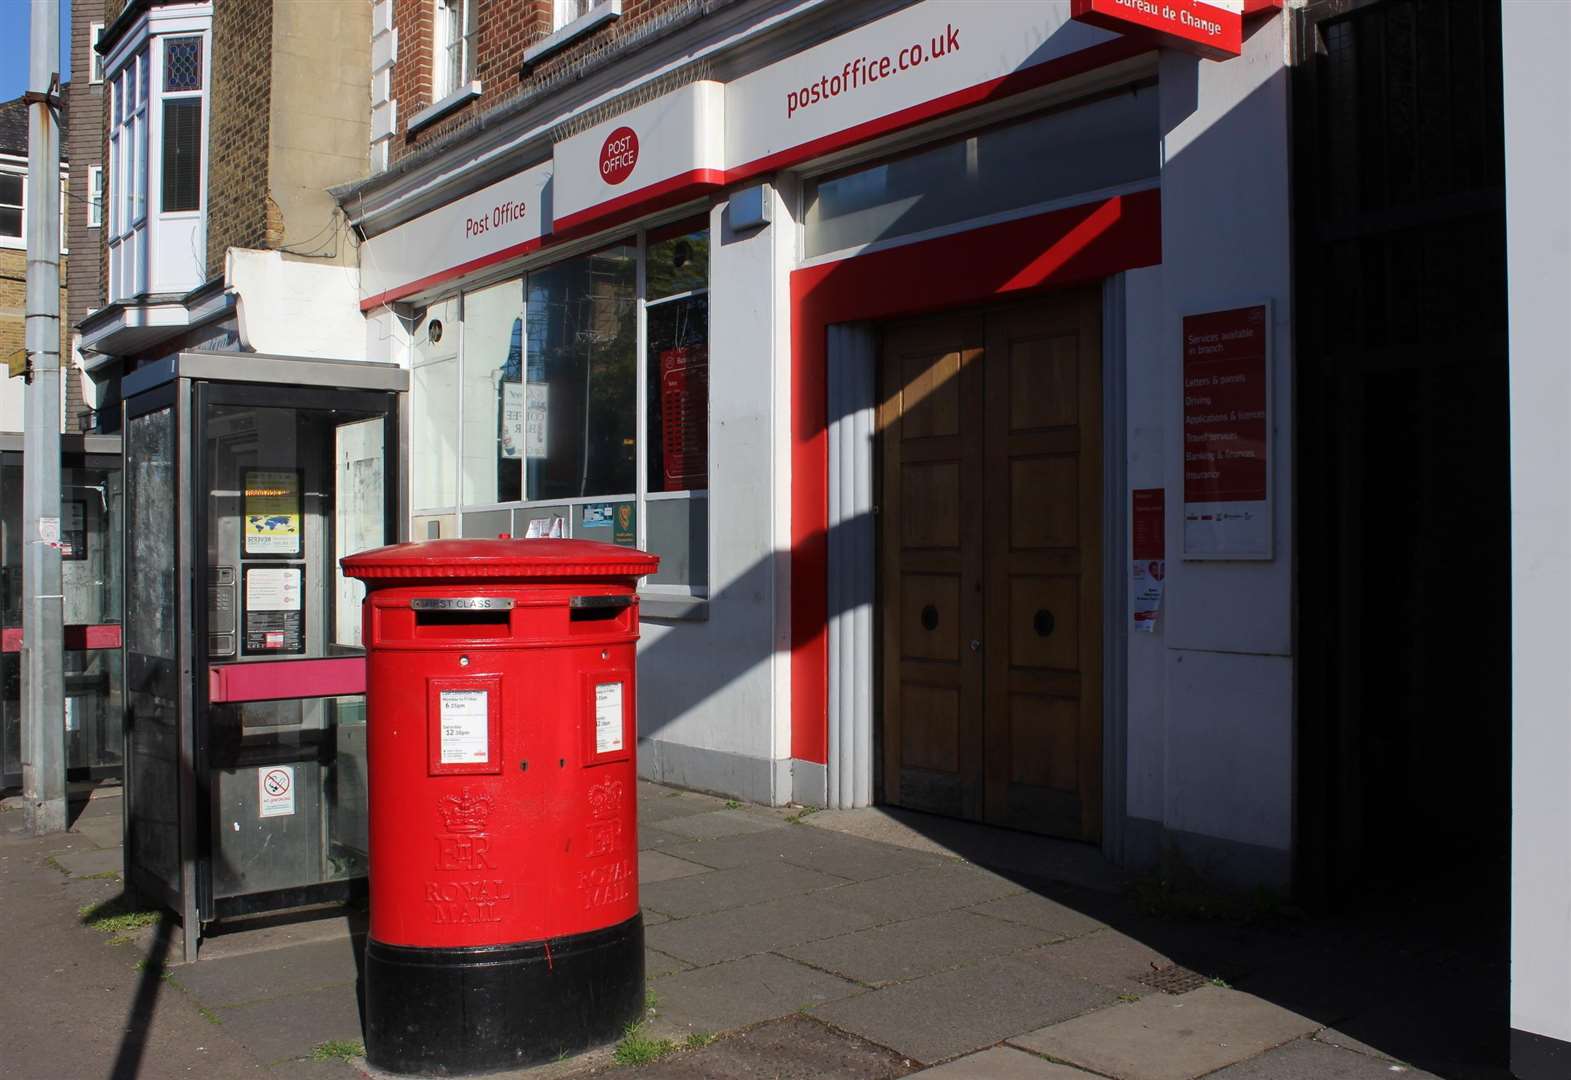 Consultation starts on proposed closure of Sheerness Post Office branch